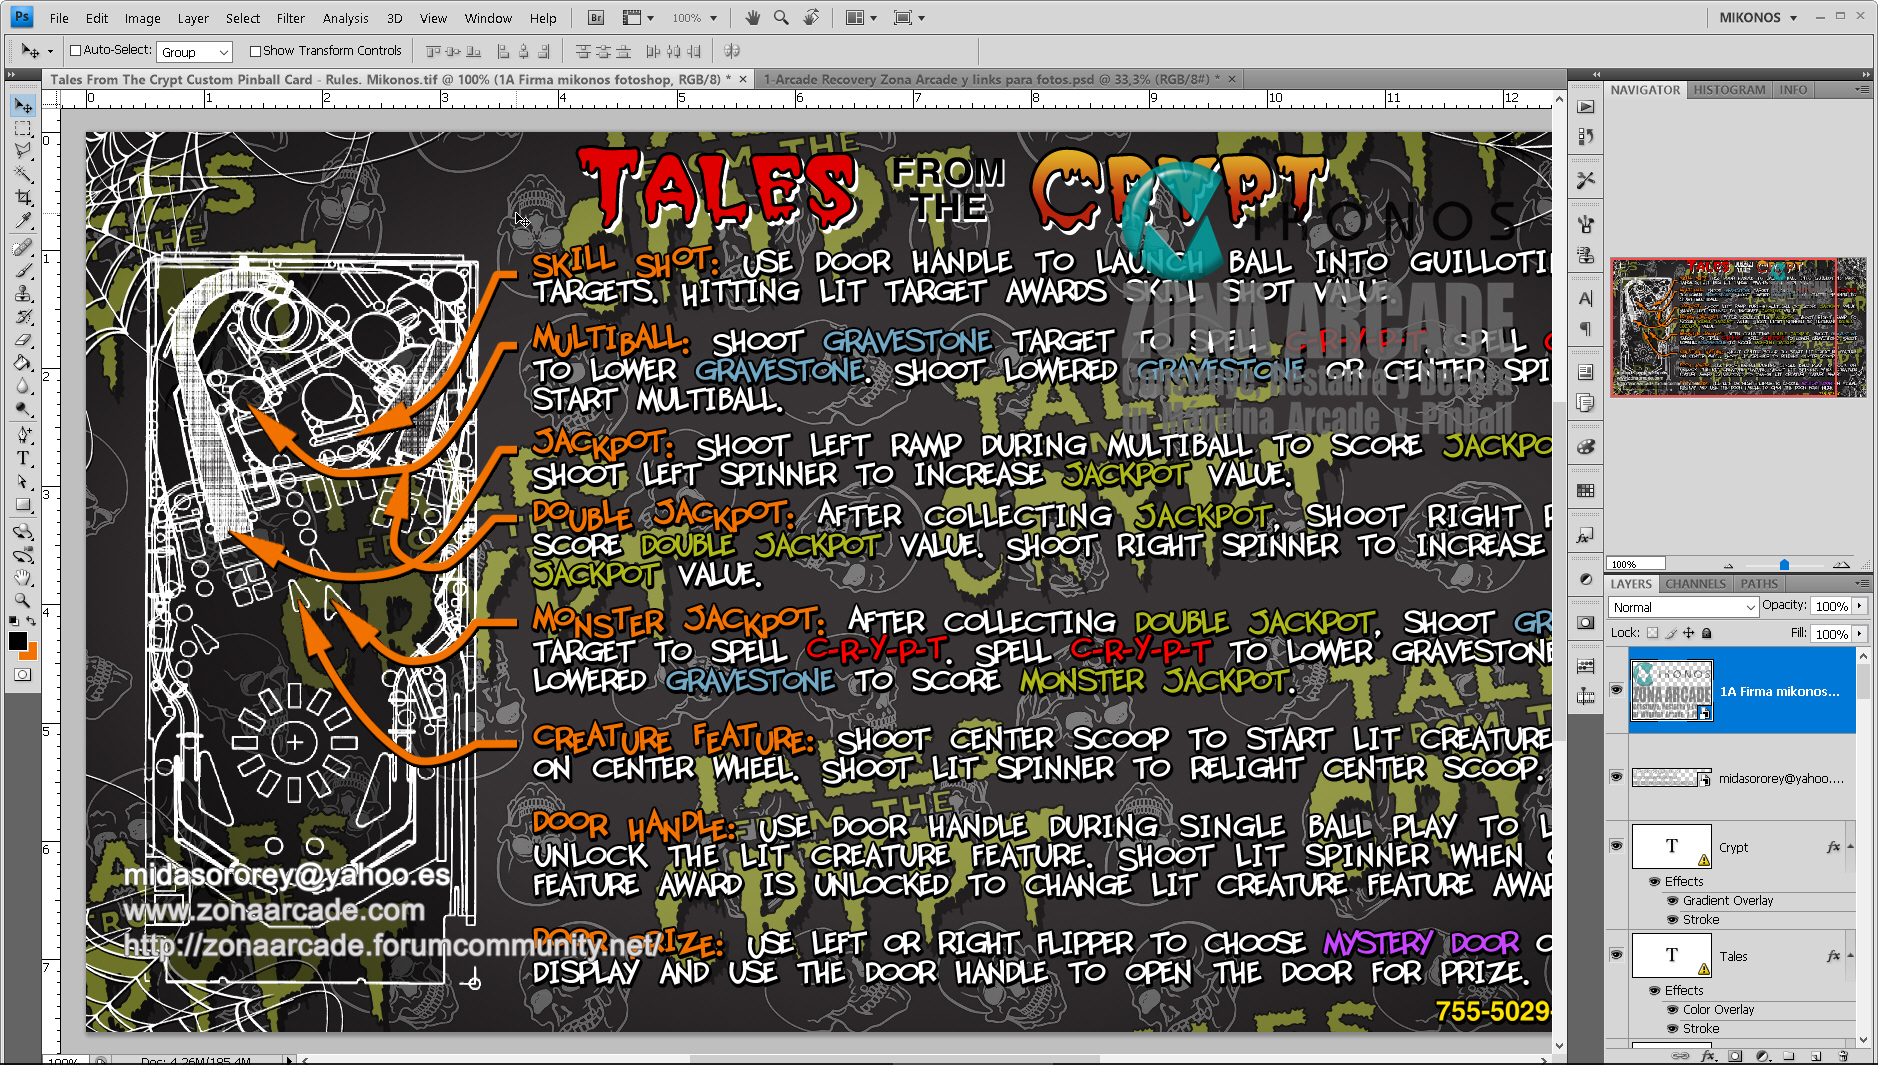 Tales From The Crypt%20Custom%20Pinball%20Card%20-%20Rules.%20Mikonos2